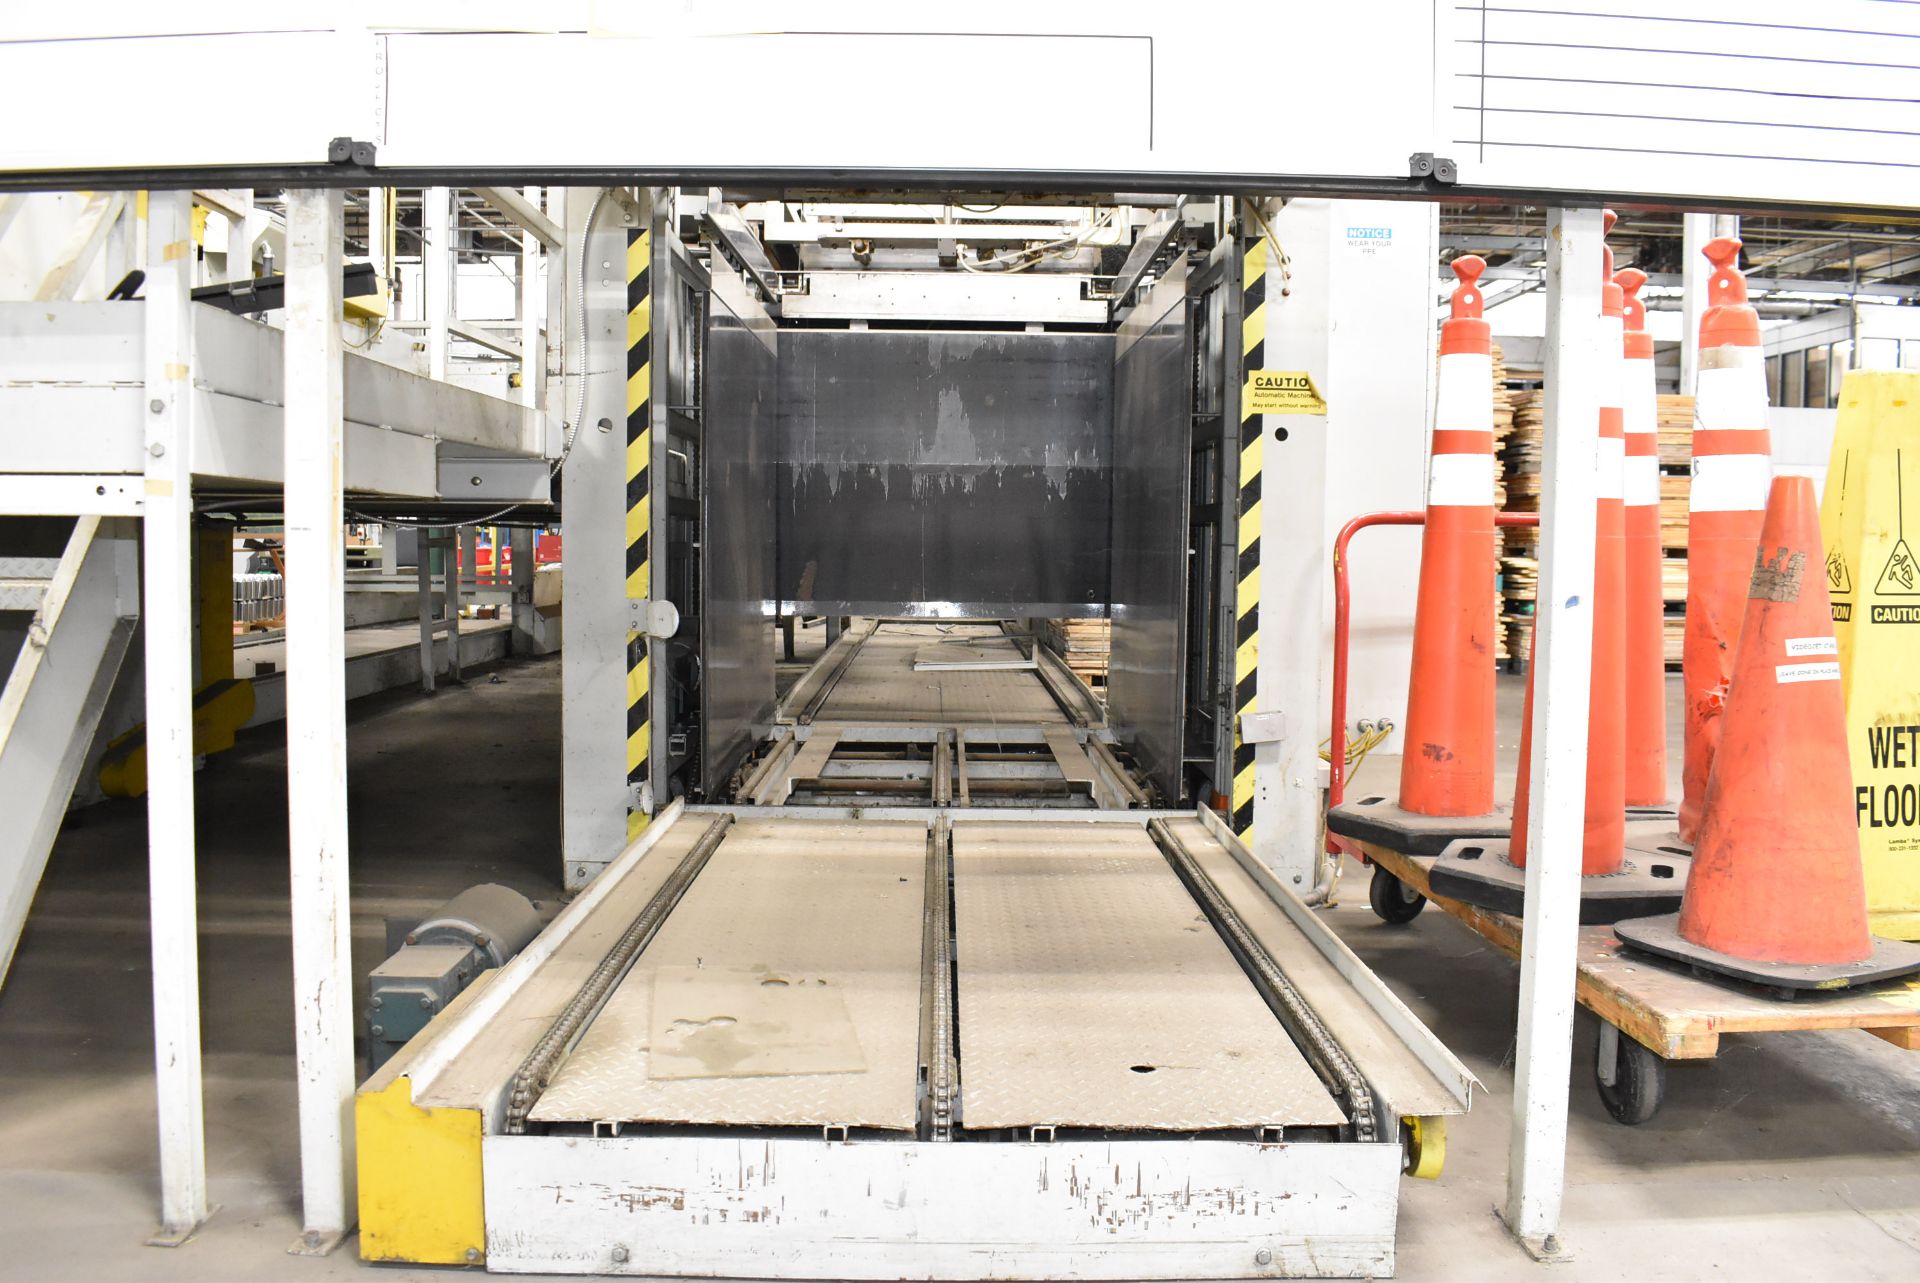 SARDEE INDUSTRIES 3500 PALLETIZER WITH ALLEN BRADLEY PANEL VIEW 600 TOUCH SCREEN CONTROL, BANNER - Image 16 of 27